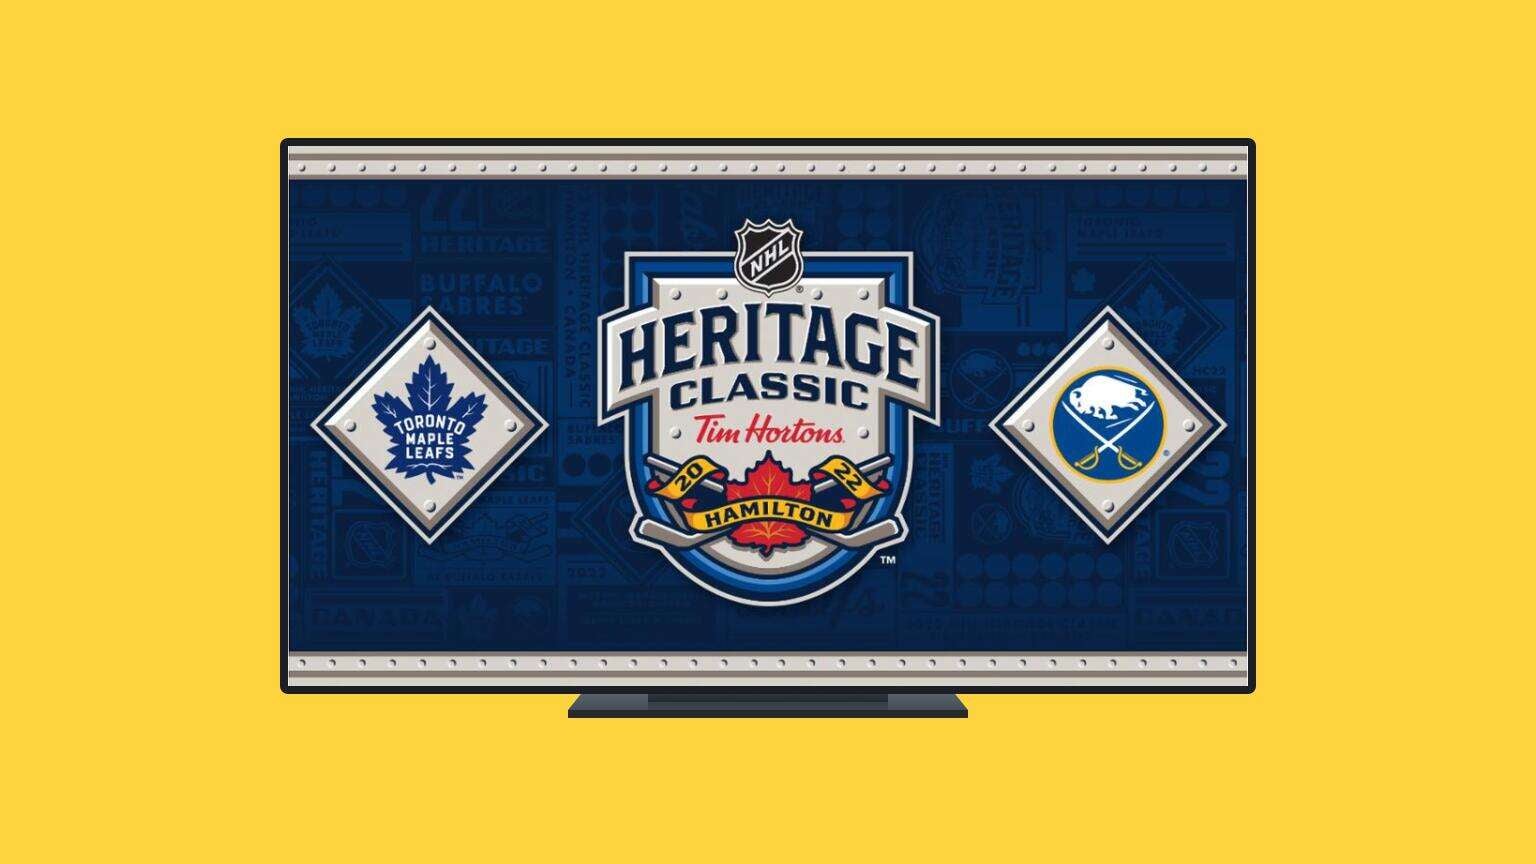 How to Watch the 2022 NHL Heritage Classic Toronto Maple Leafs vs. Buffalo Sabres Live For Free